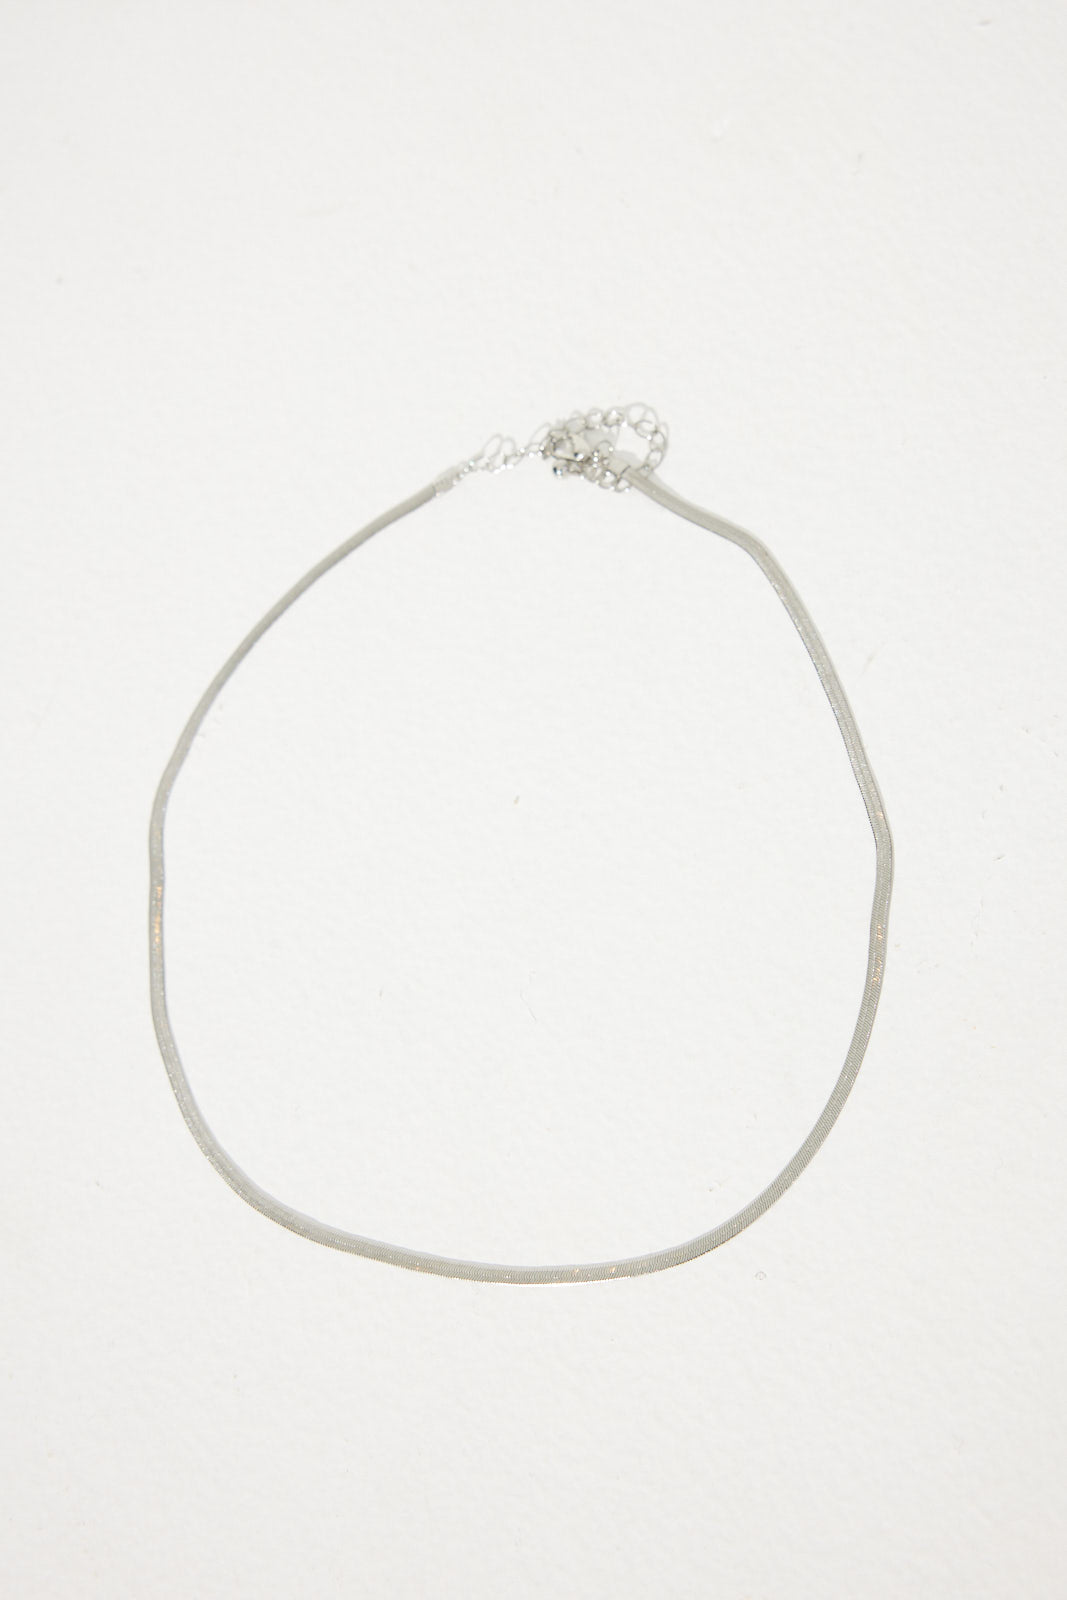 NTH Snake Chain Necklace Silver